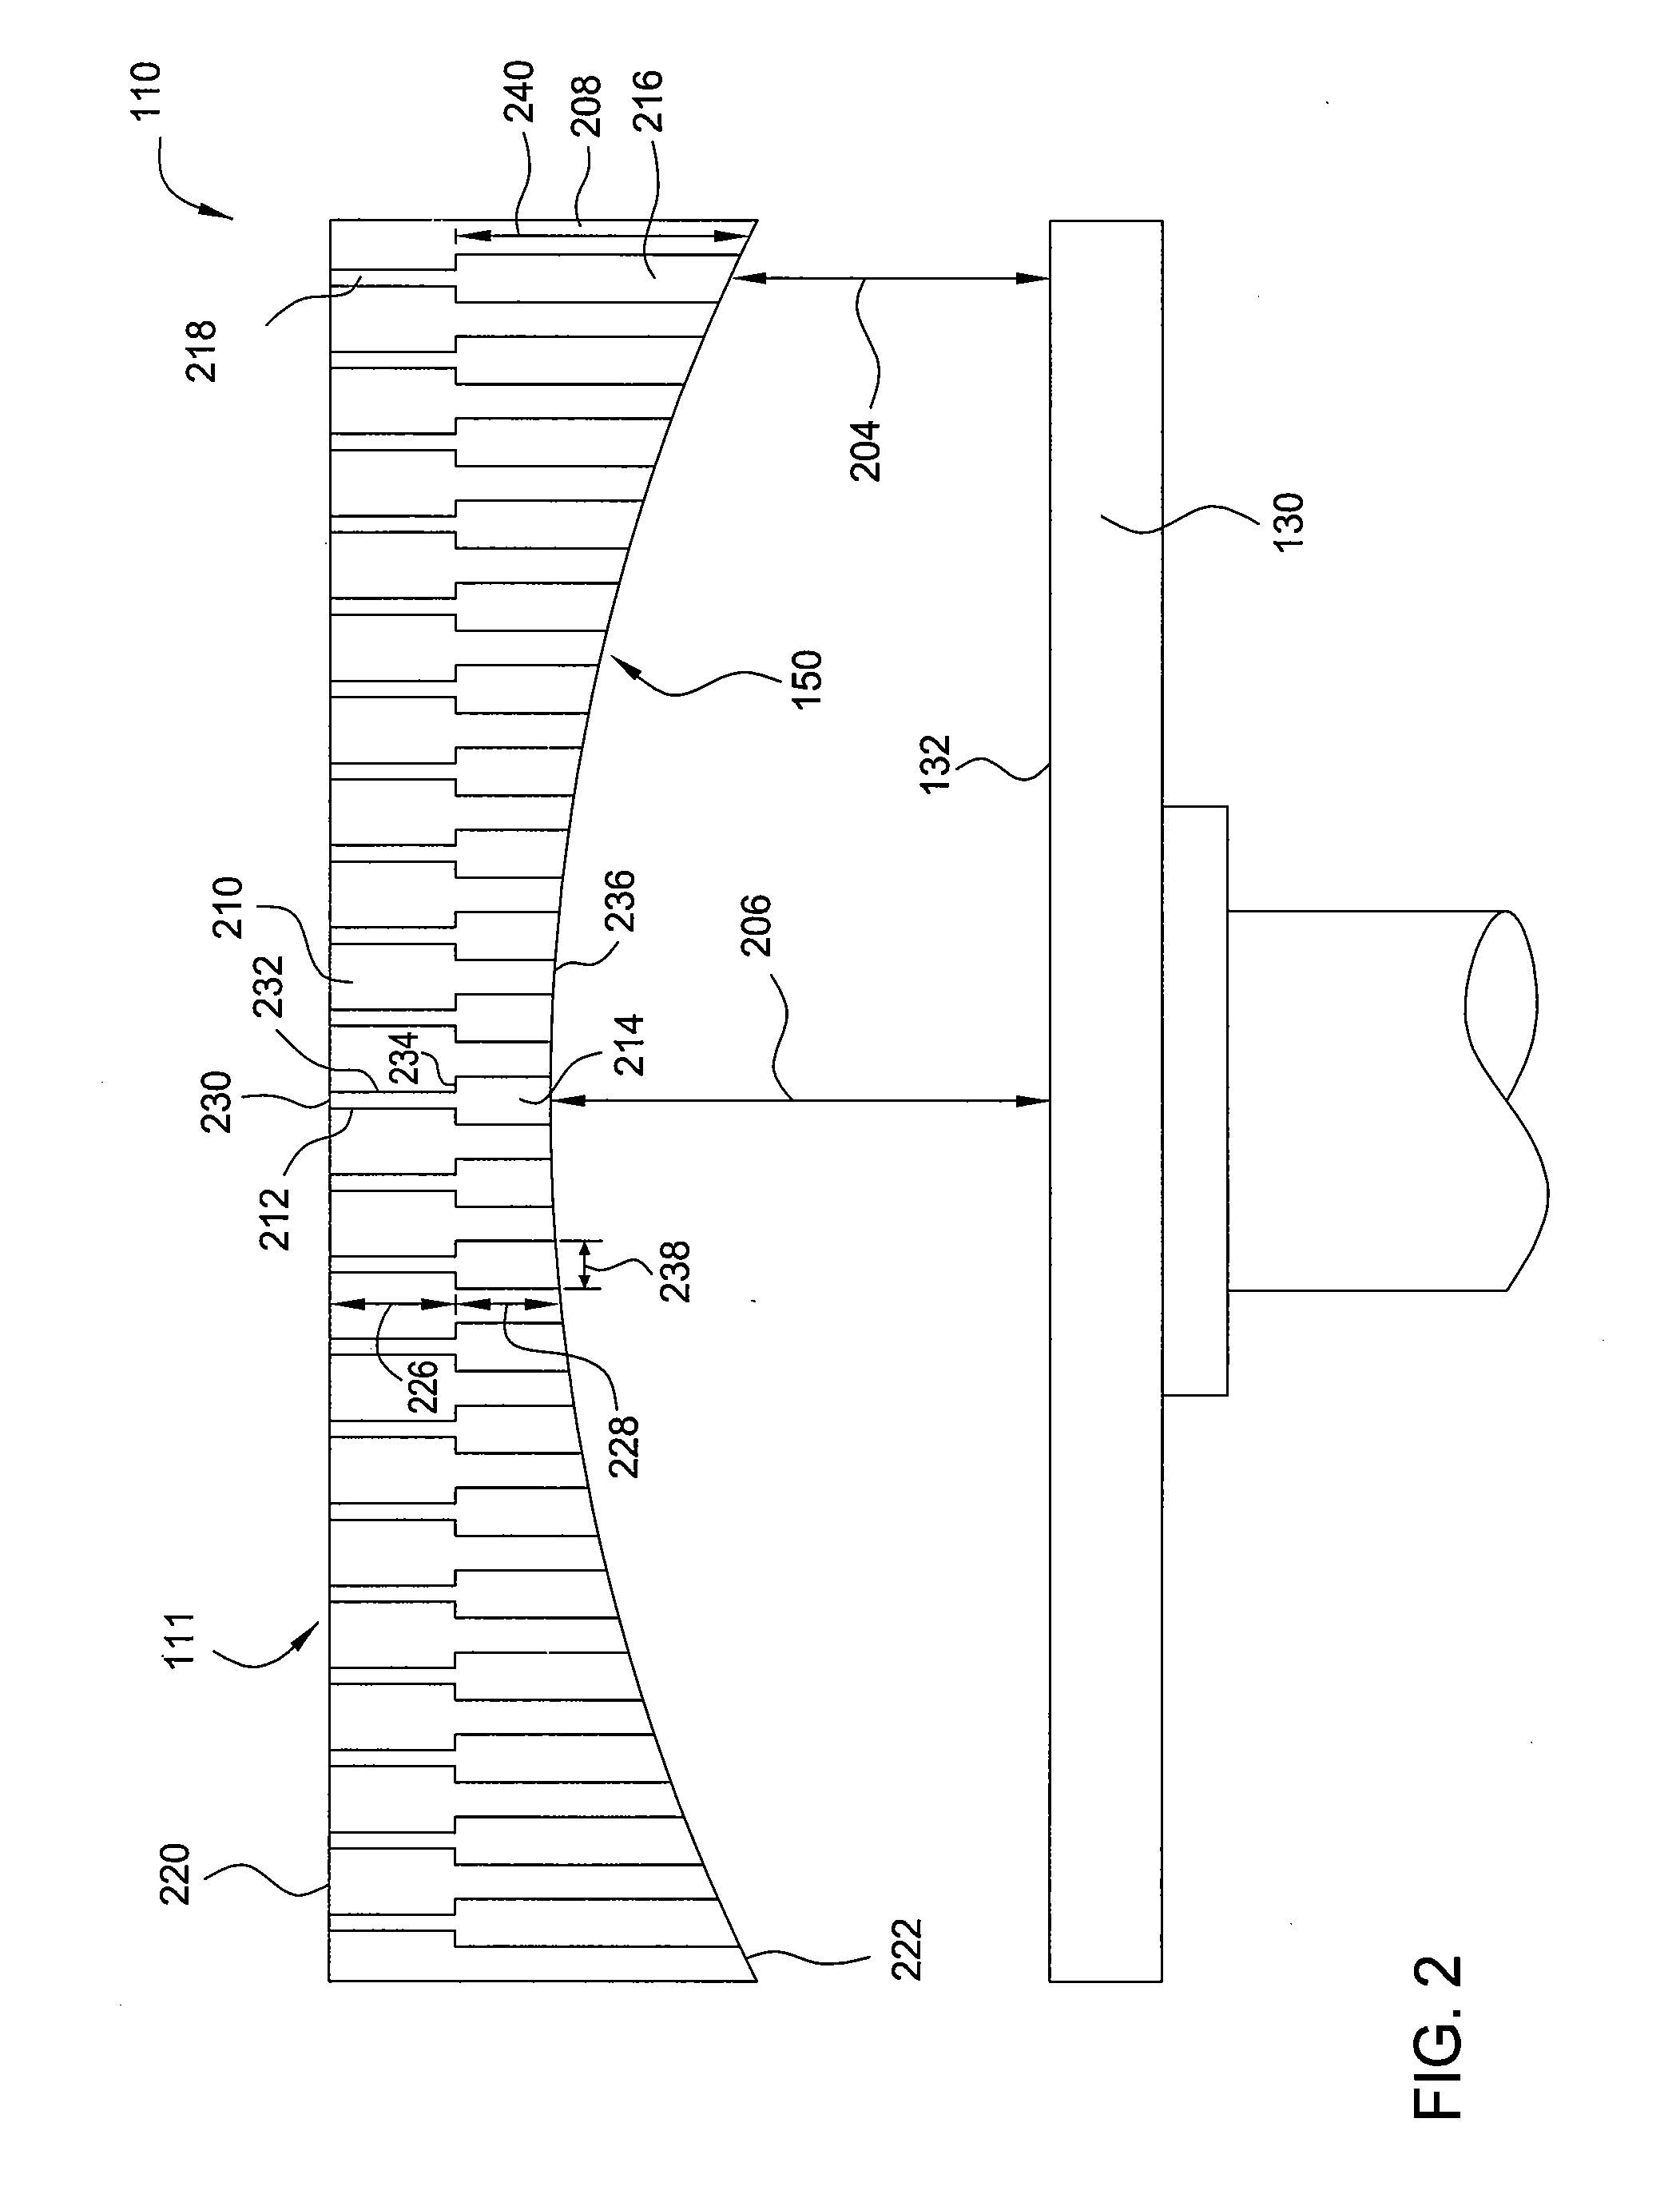 Apparatus for depositing a uniform silicon film and methods for manufacturing the same